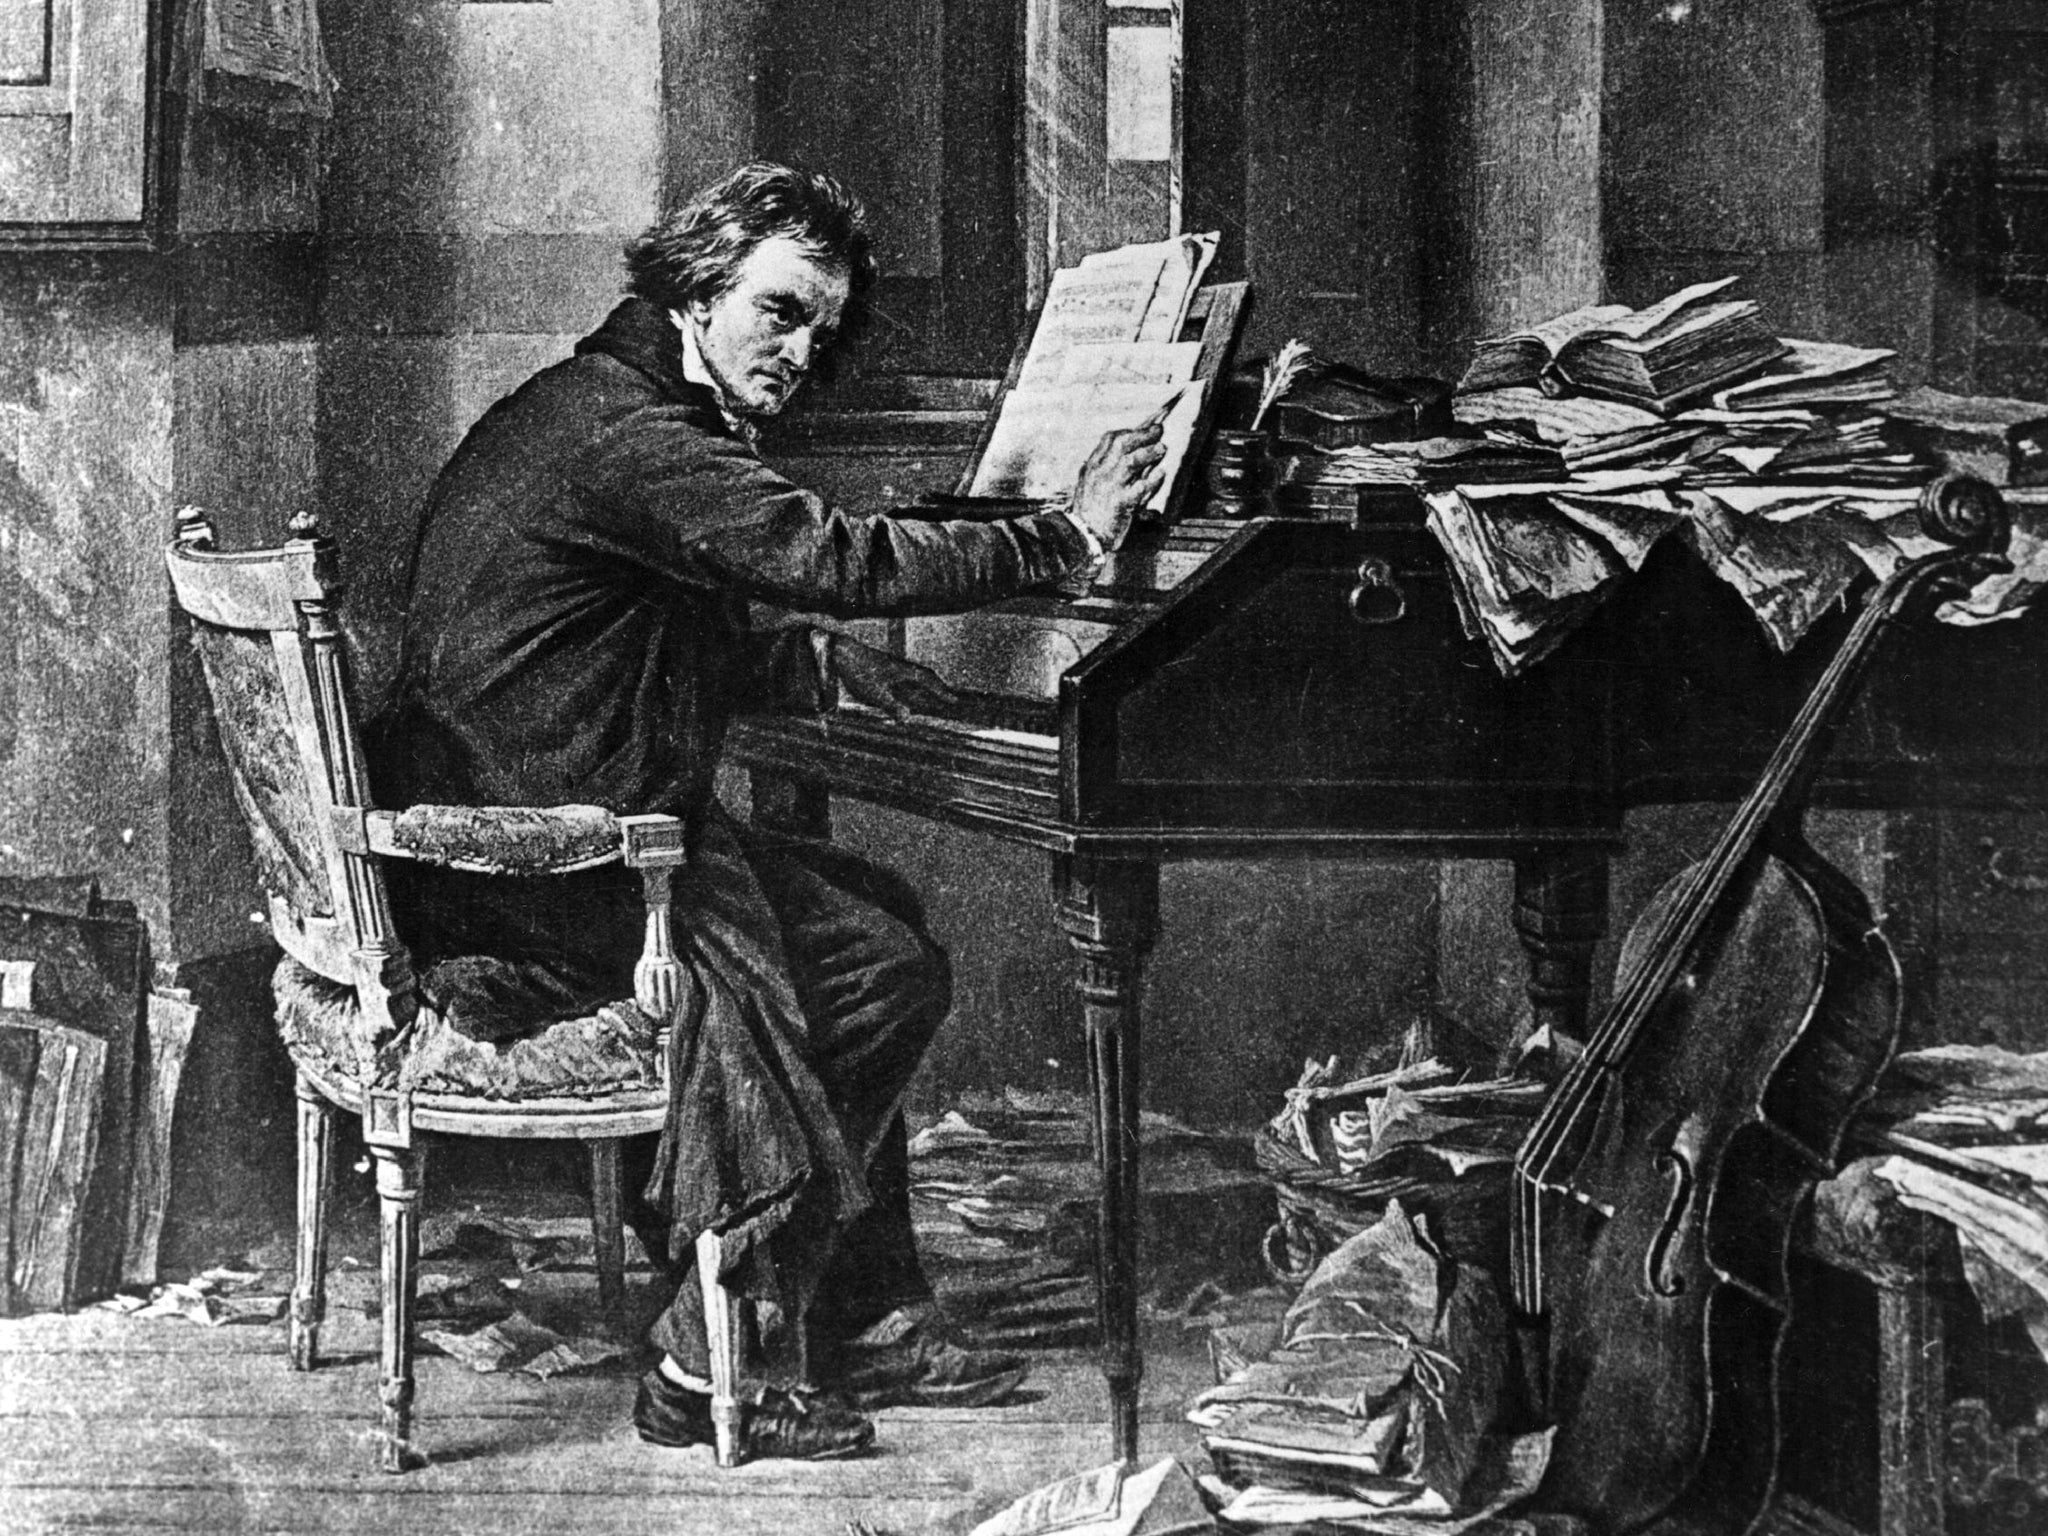 Beethoven’s 250th birthday will be celebrated in December